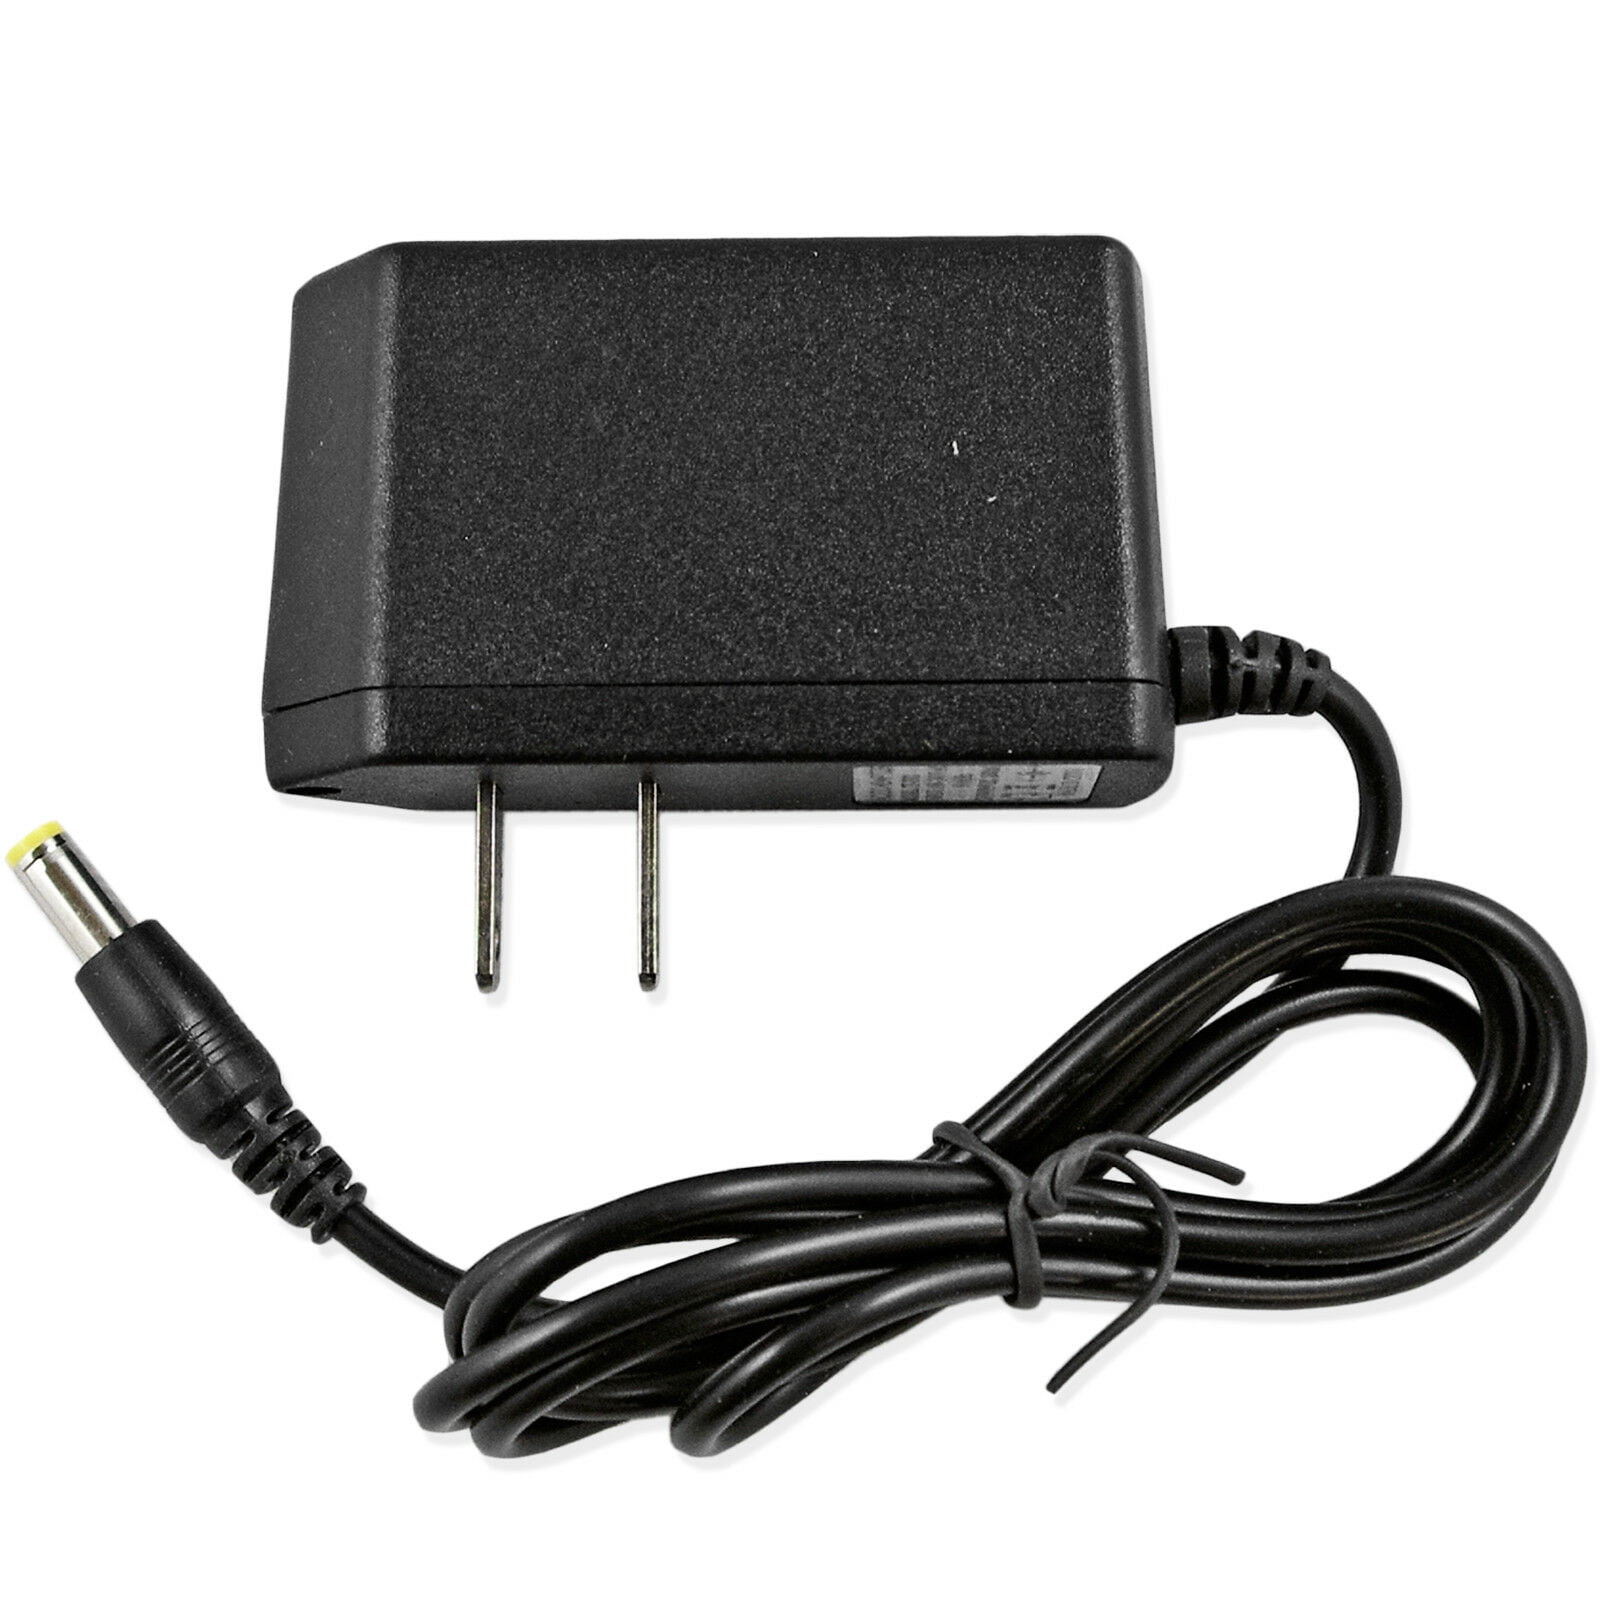 9V AC DC Adapter for Casio LK-90TV LK-94TV Keyboard Wall Charger Power Supply 